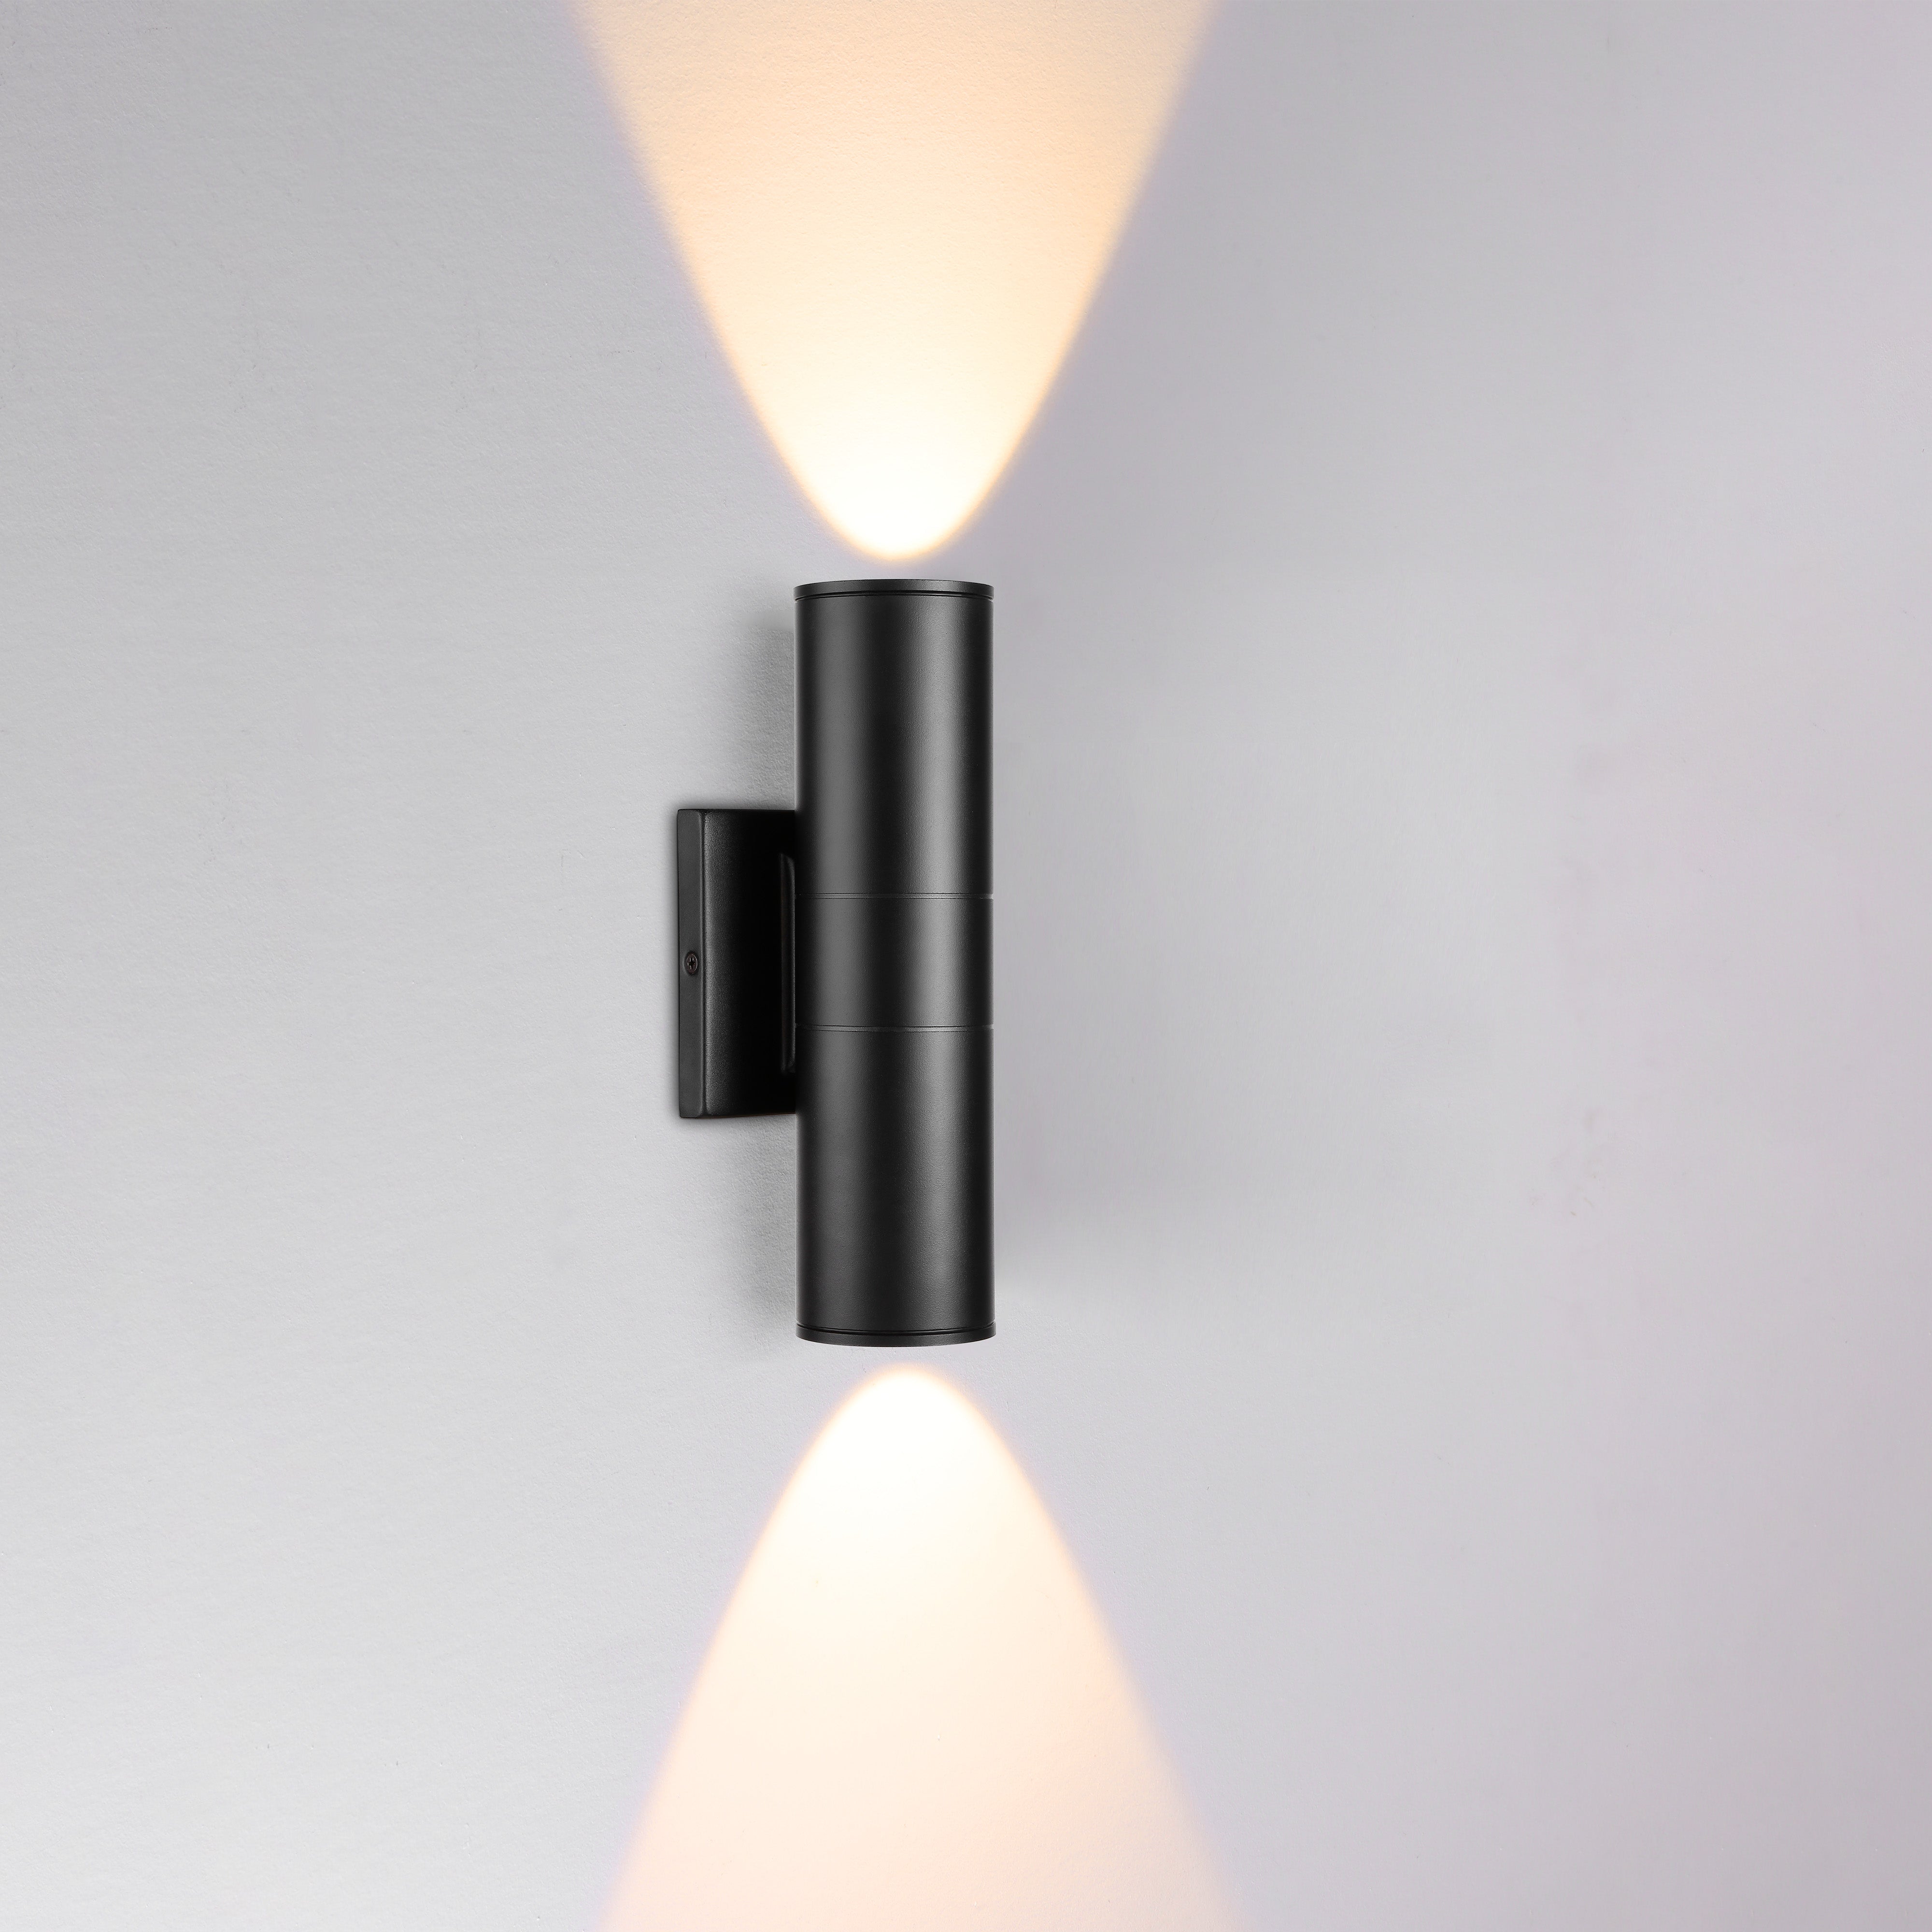 exCylinders 11.7" Outdoor LED Wall Sconce